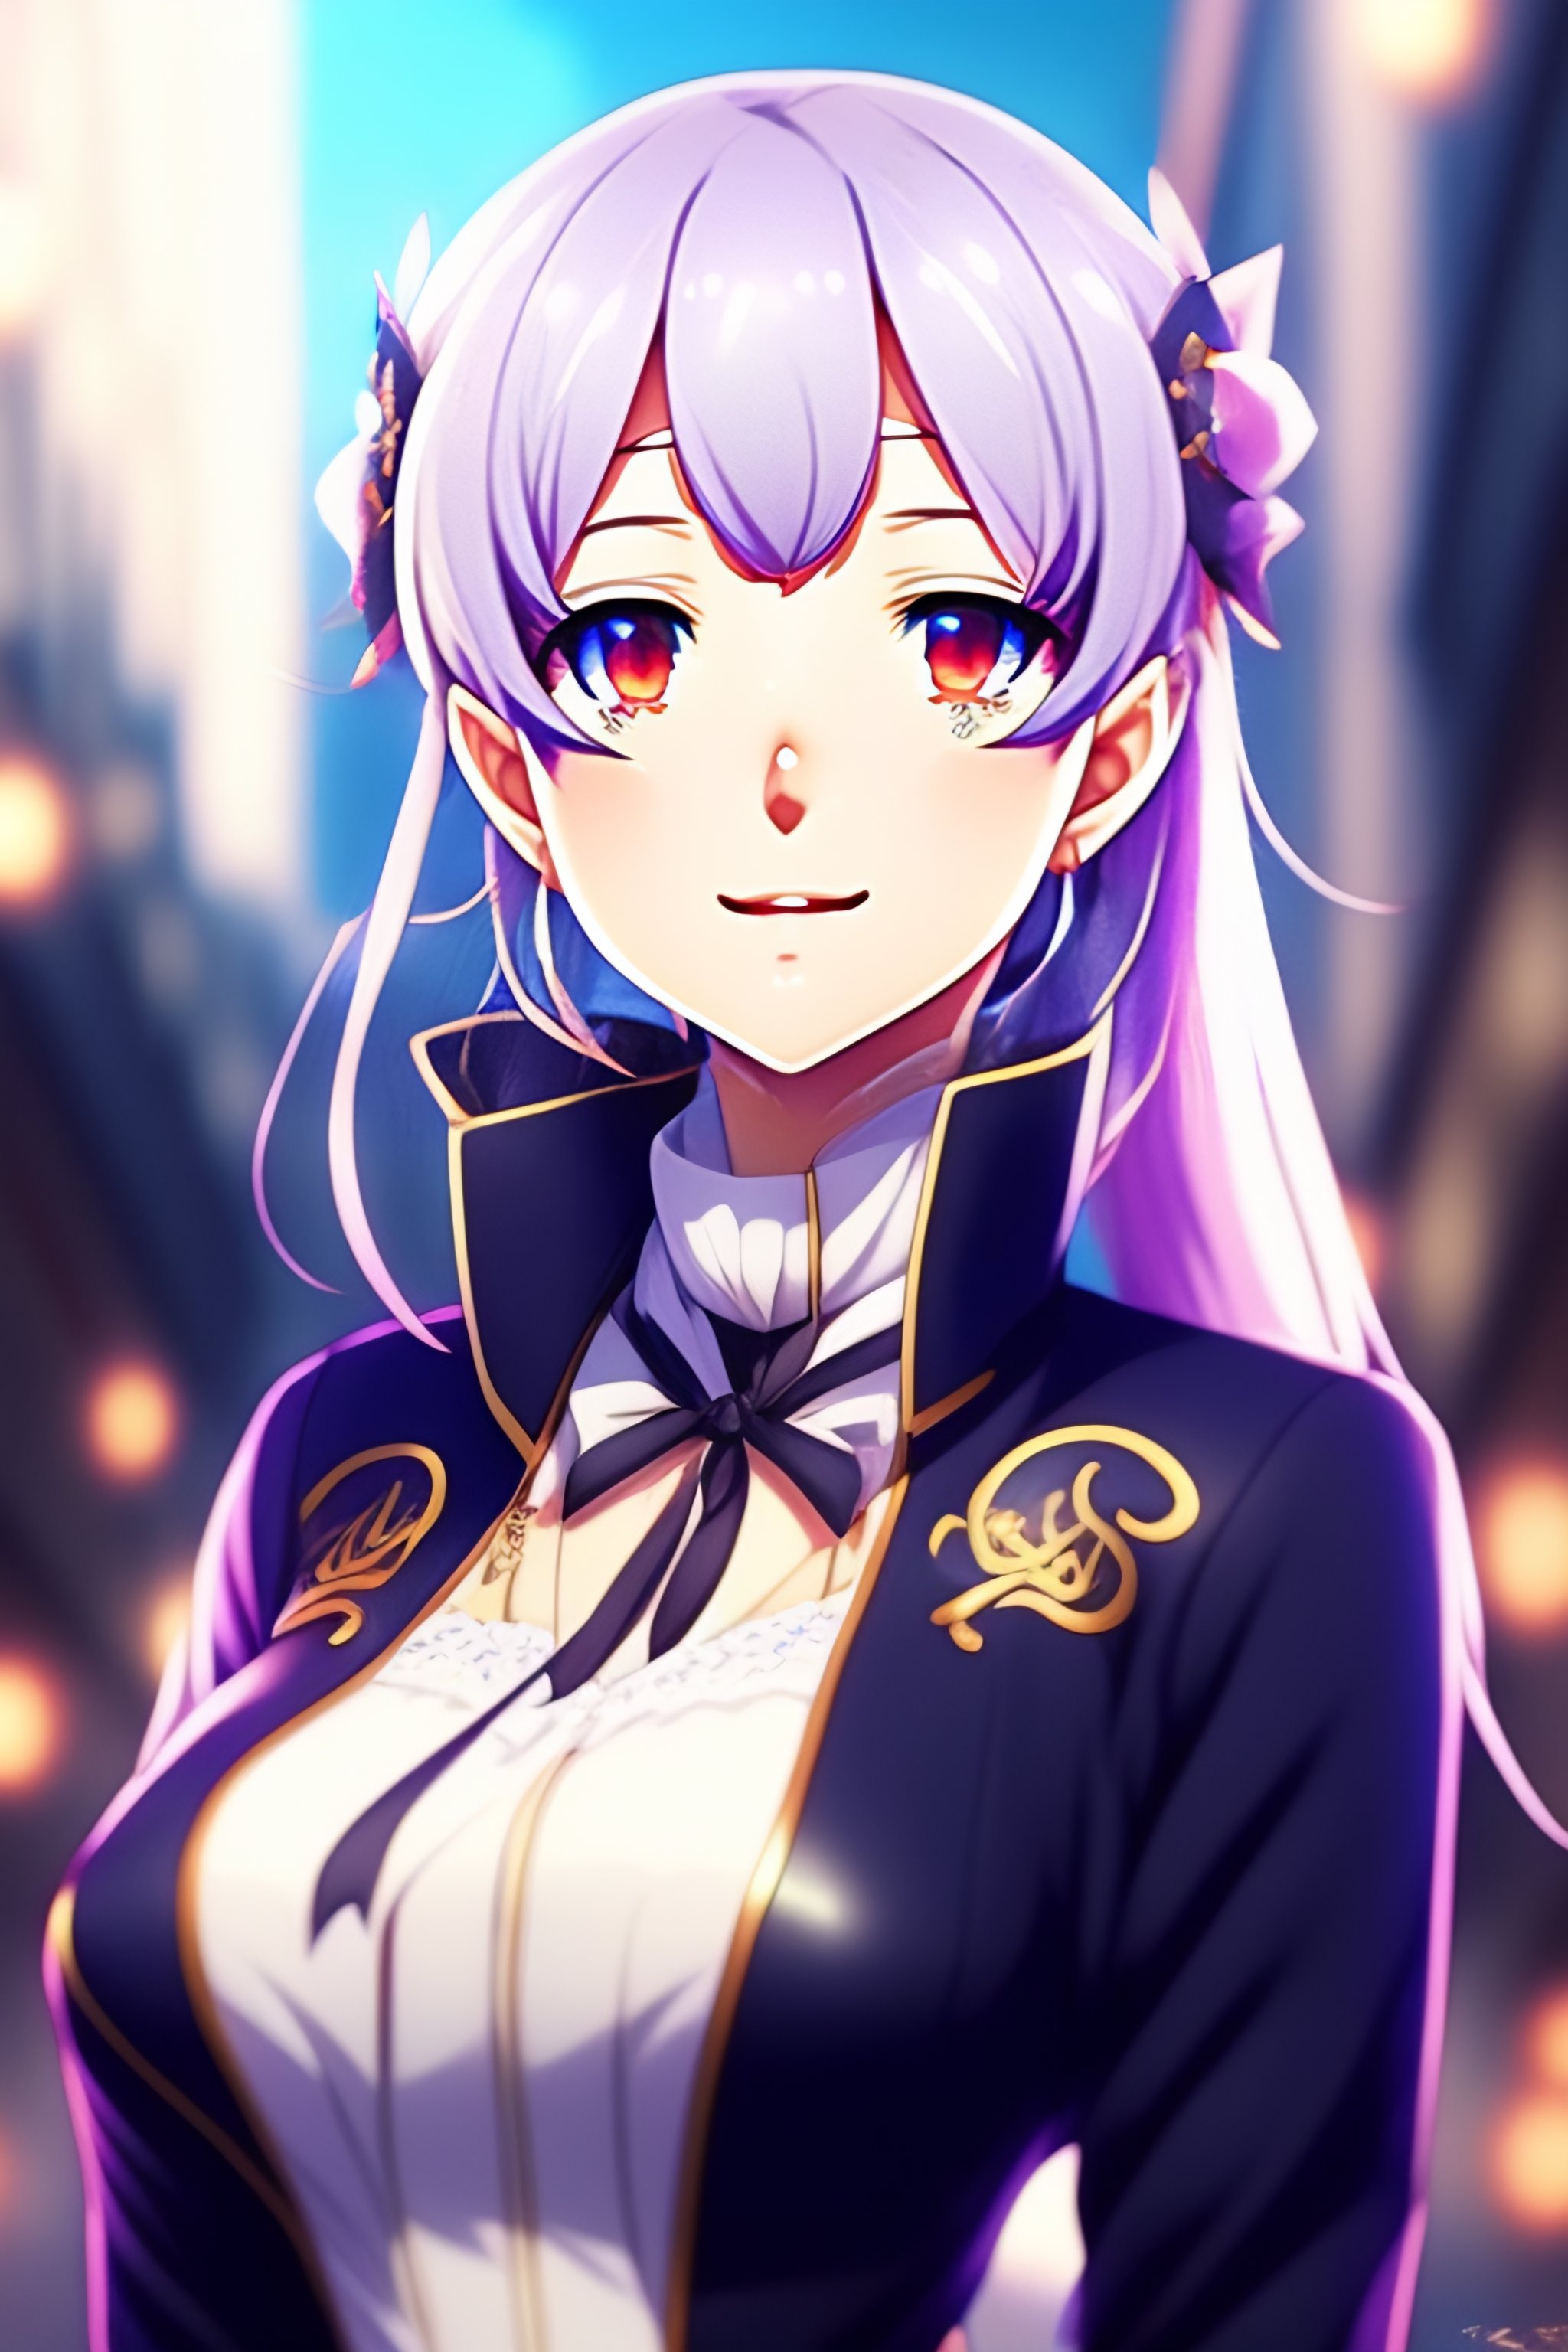 Lexica - Rem from anime series Re:Zero − Starting Life in Another World,  Portrait of pretty anime girl, night city background illustration concept  ar...